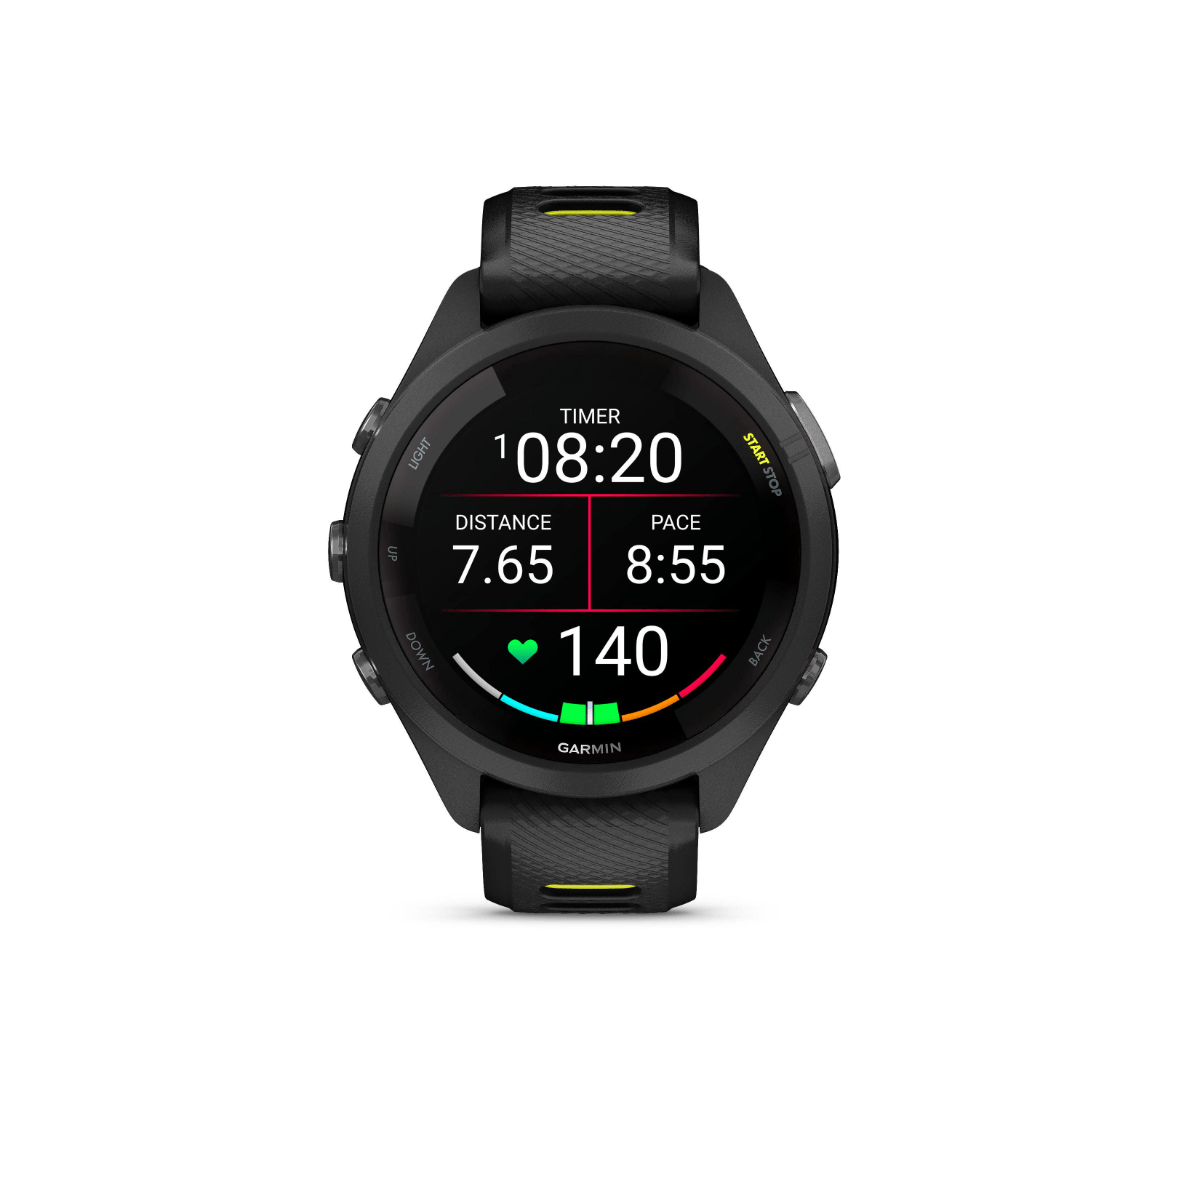 Garmin Forerunner 265: Tried and tested